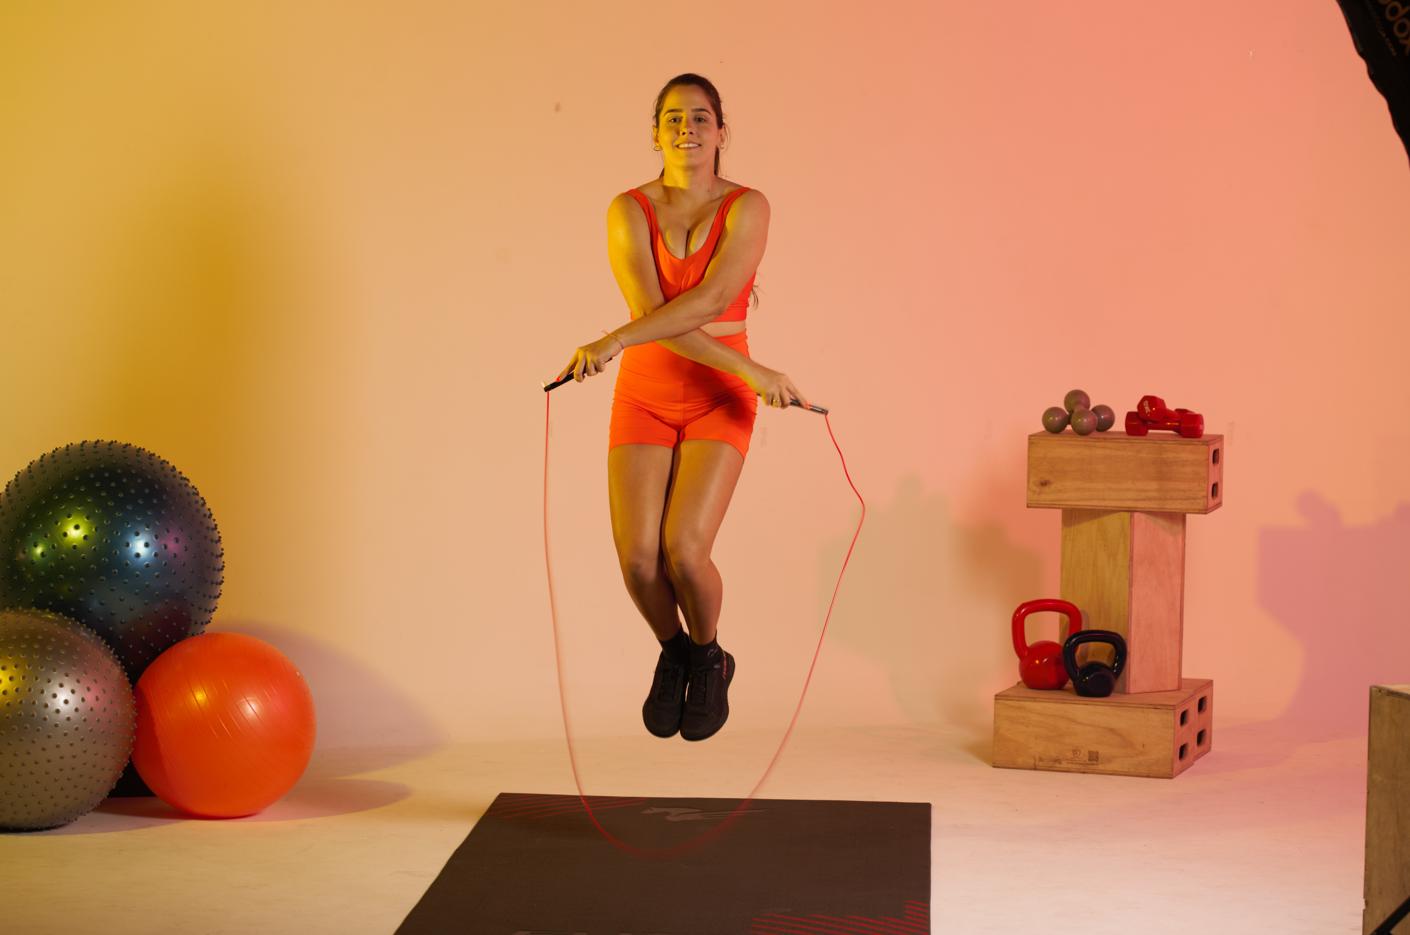 When You Jump Rope Every Day, This Is What Happens To Your Body